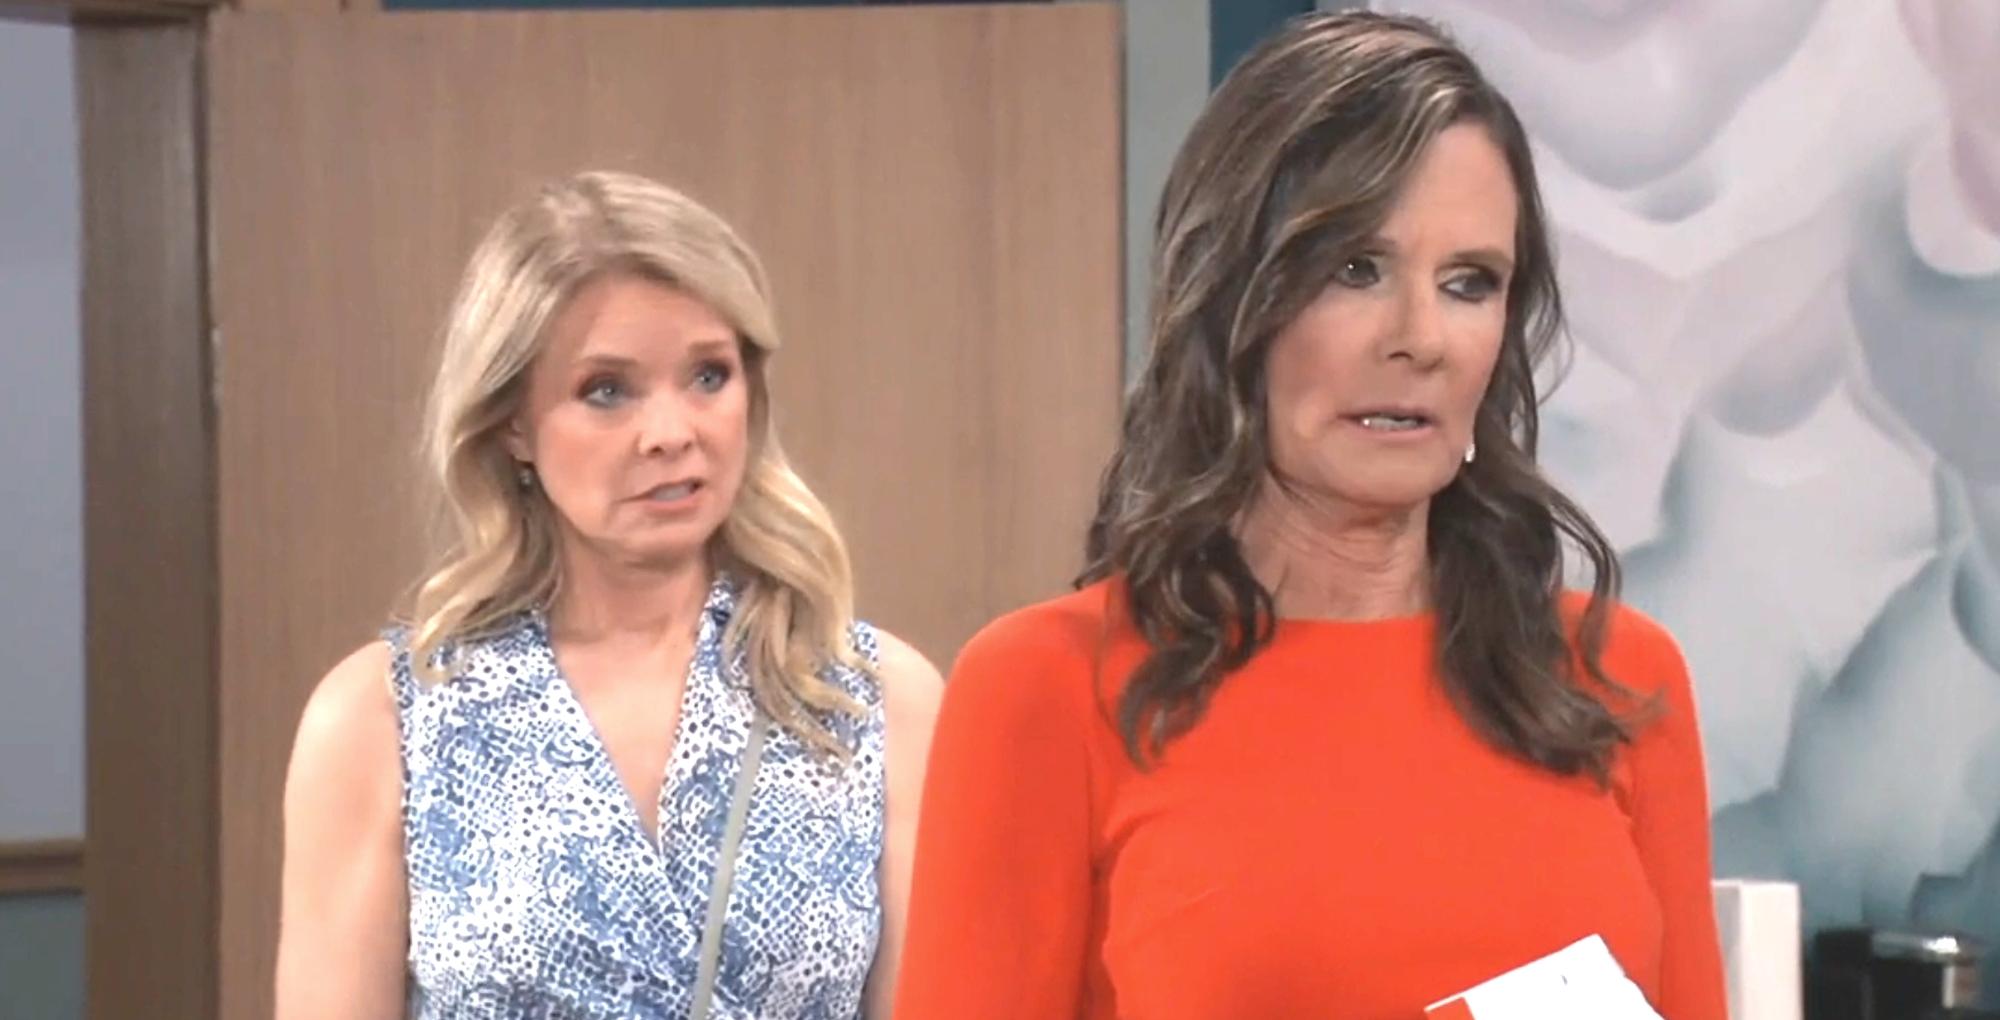 the general hospital recap for july 6 2023 have lucy getting news from felicia.